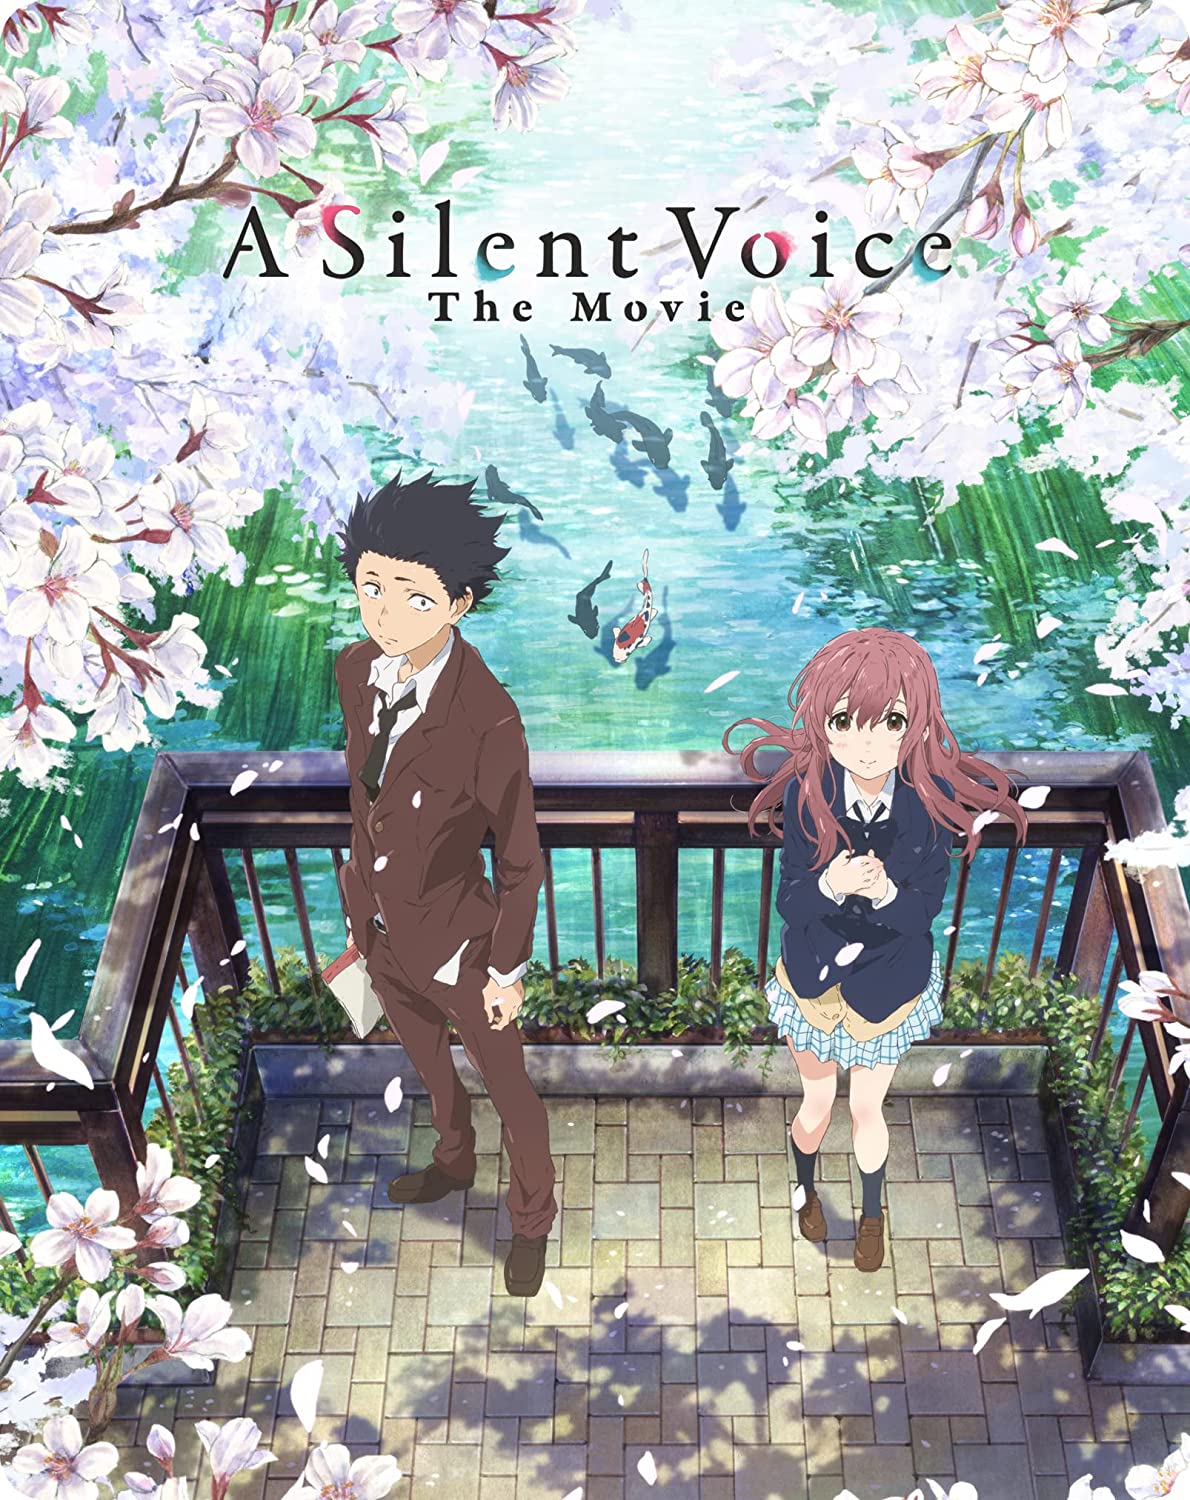 A Silent Voice- The Movie - Limited Edition Steelbook Blu-ray